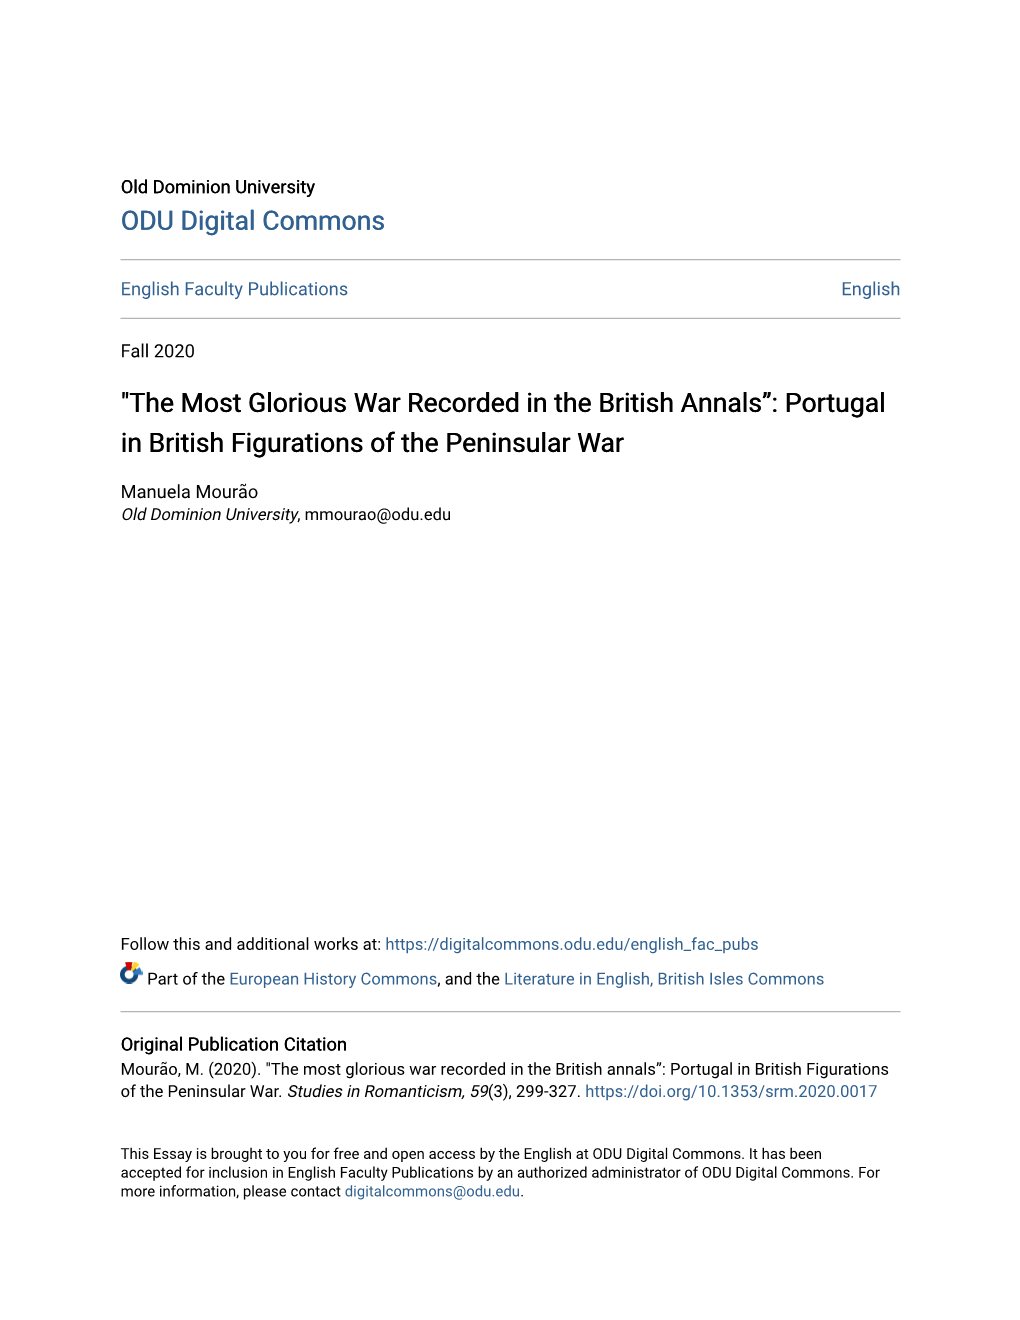 The Most Glorious War Recorded in the British Annals”: Portugal in British Figurations of the Peninsular War